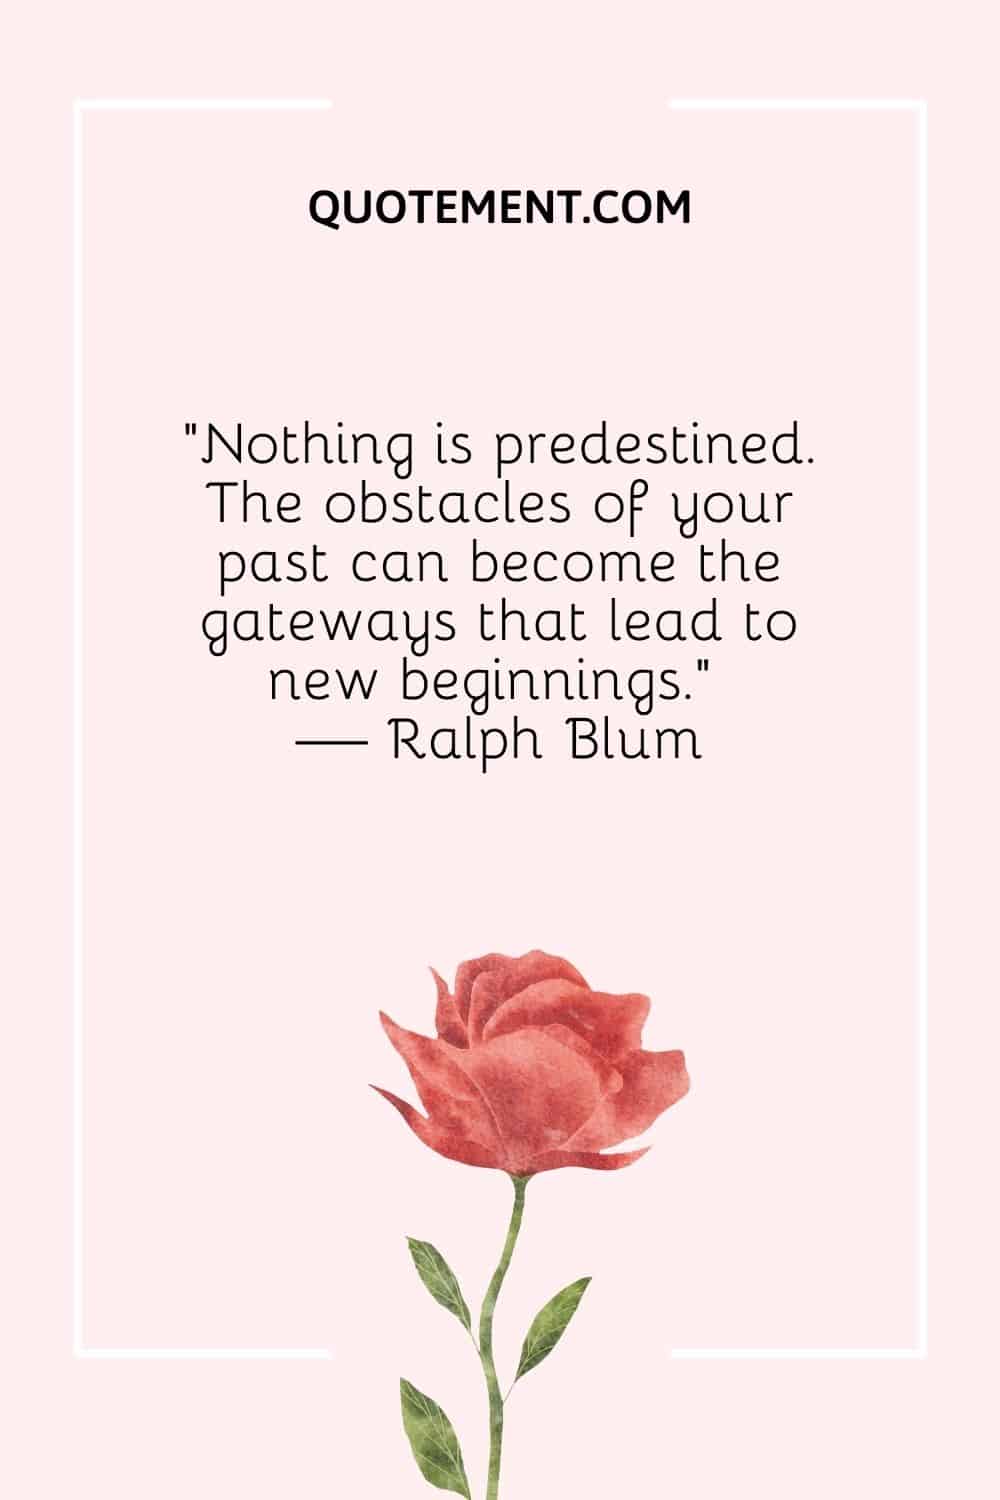 “Nothing is predestined. The obstacles of your past can become the gateways that lead to new beginnings.” — Ralph Blum